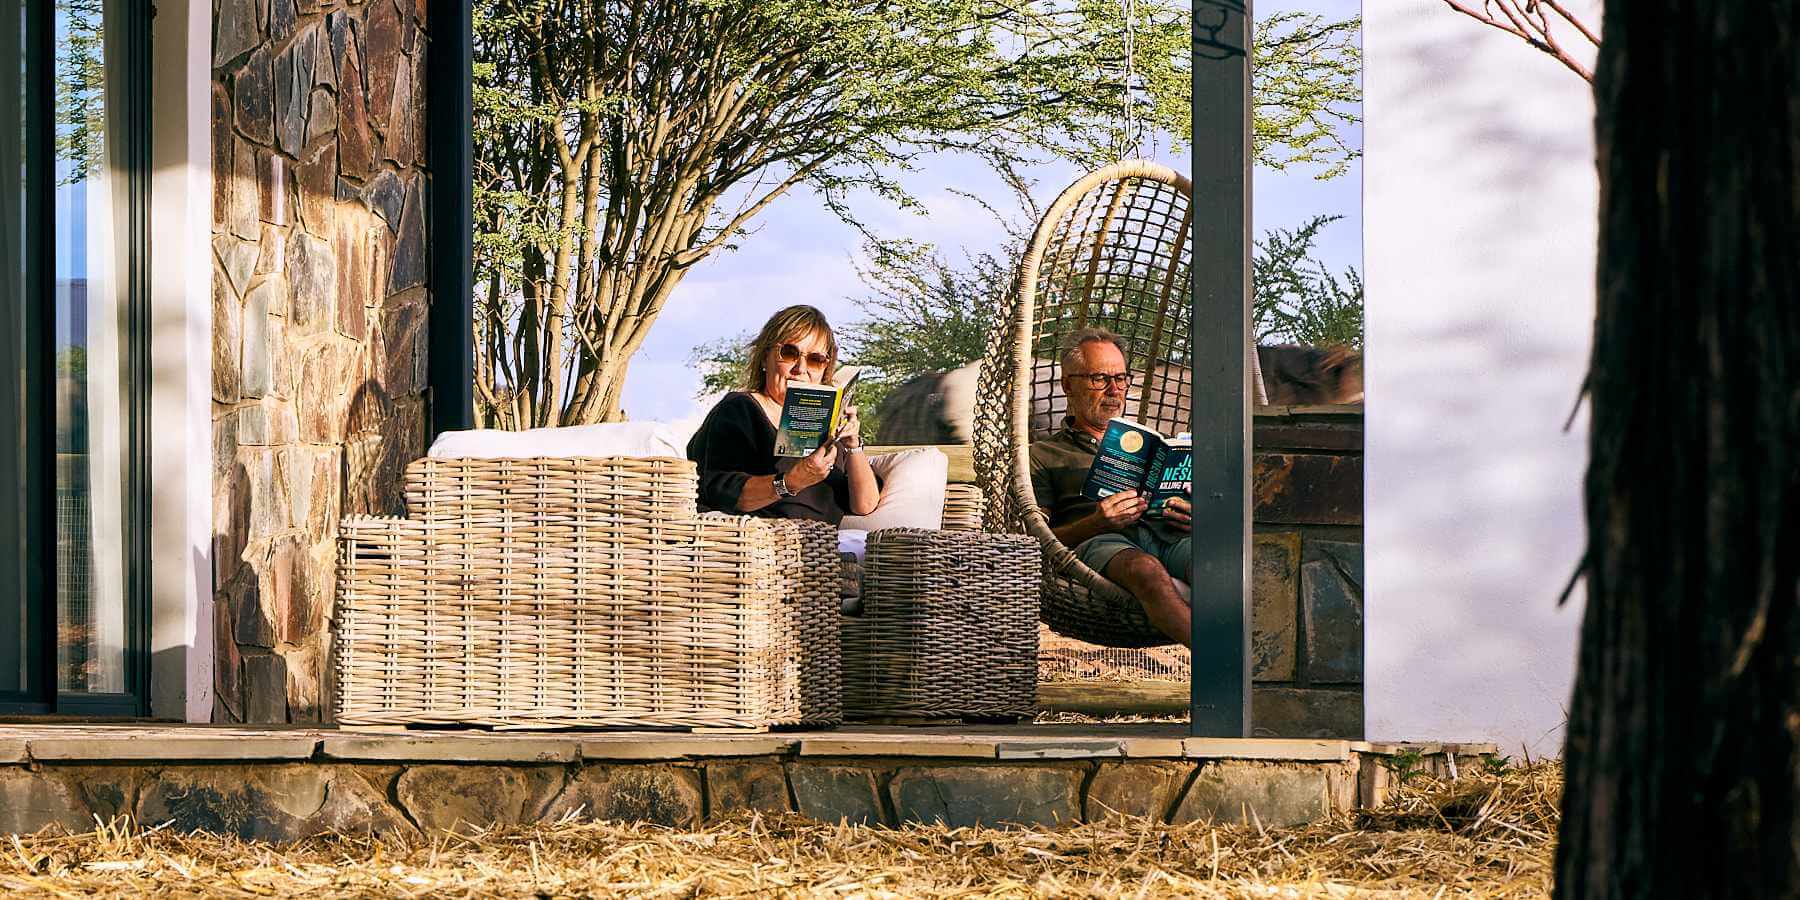 A couple relaxing on their private veranda after a fulfilled day's activities at Sandwerf.